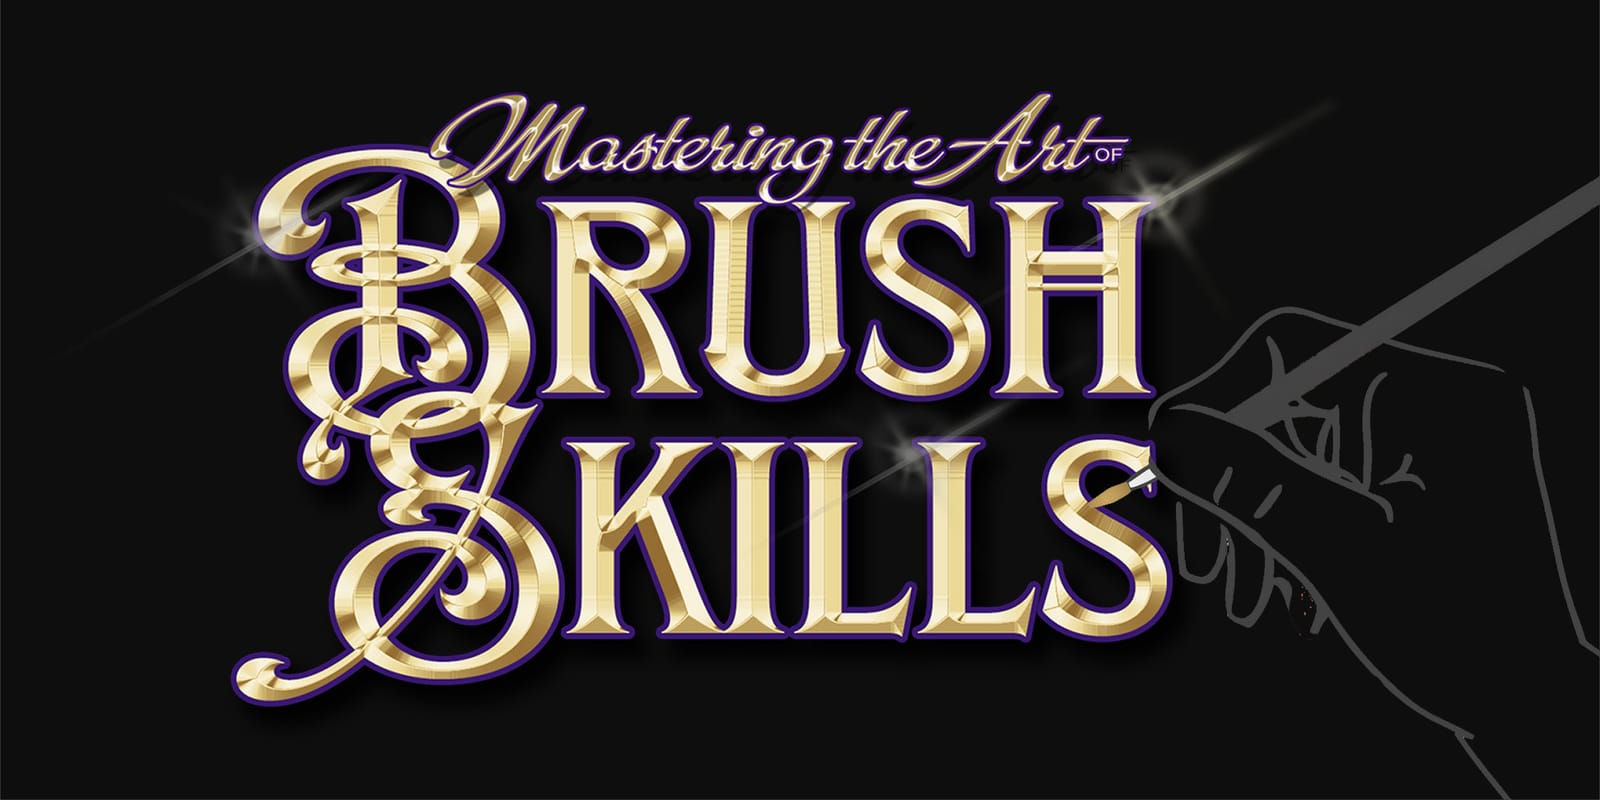 Beveled lettering in gold with a purple outline that reads "Mastering the Art of Brush Skills", and with an outline hand and brush adding some paint to the final letter S.